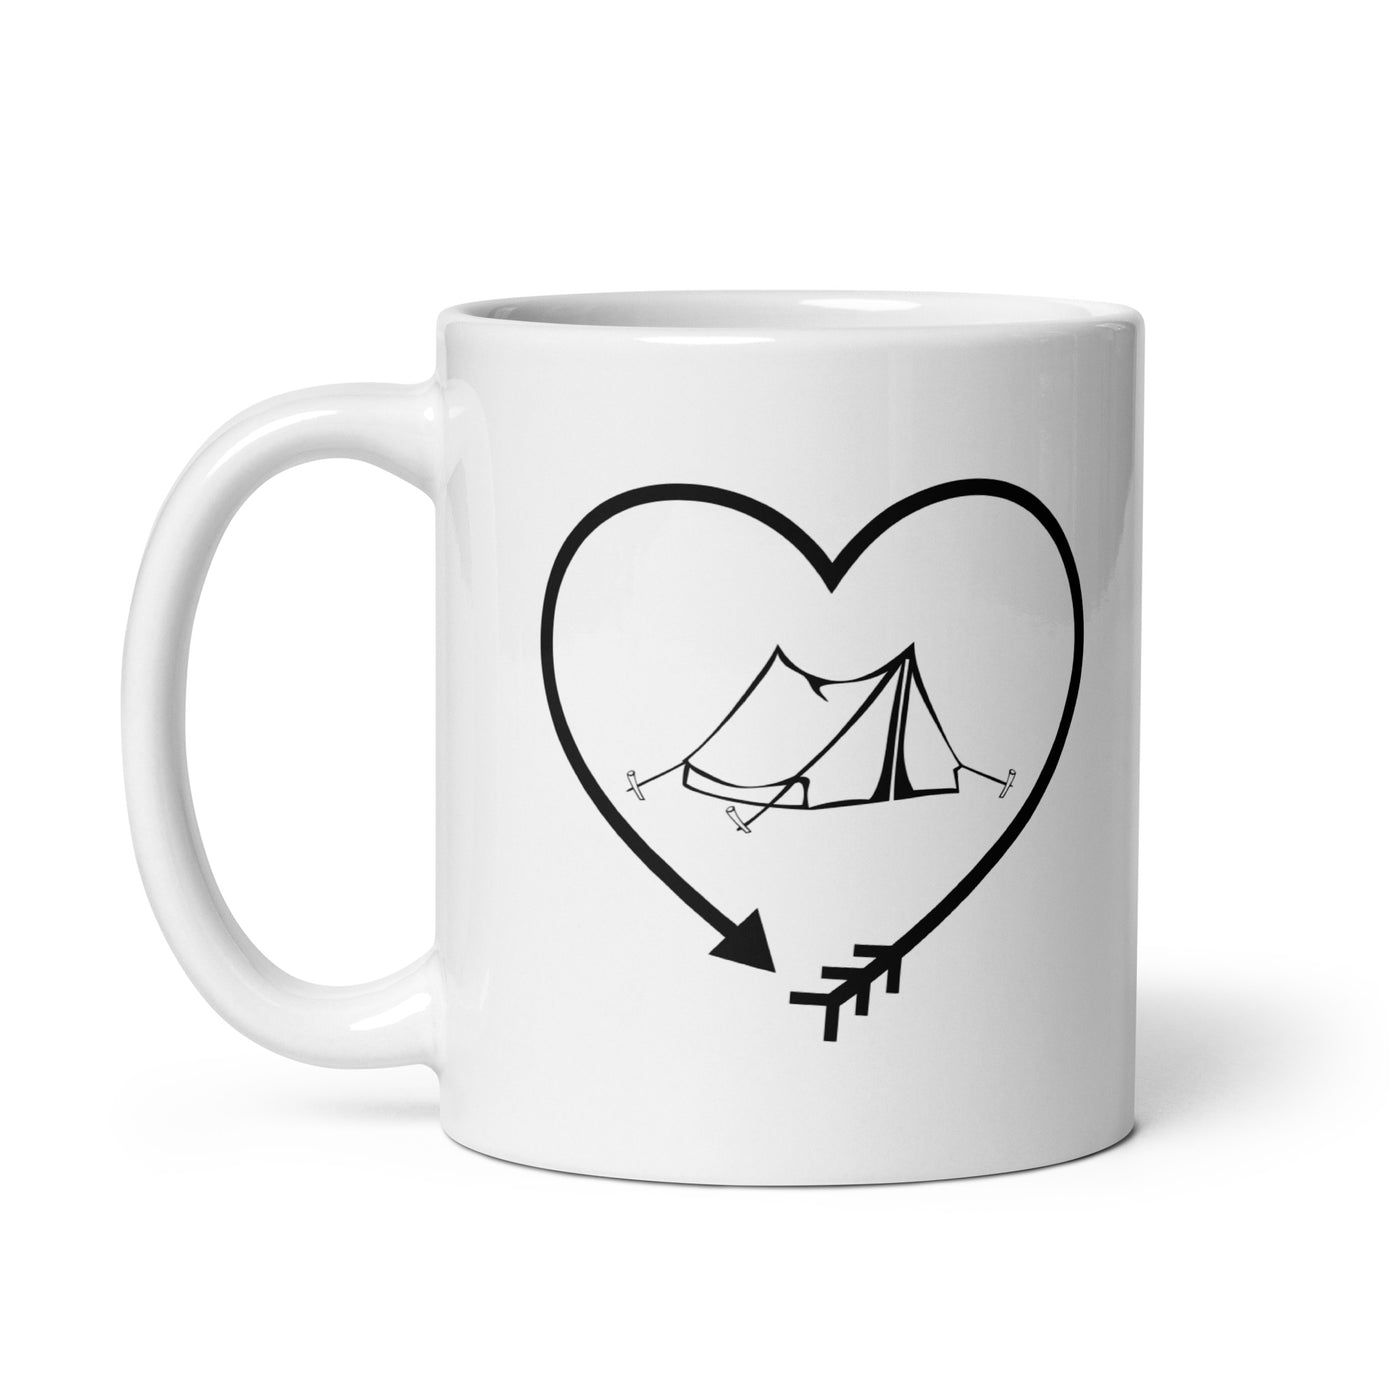 Arrow In Heartshape And Camping 1 - Tasse camping 11oz